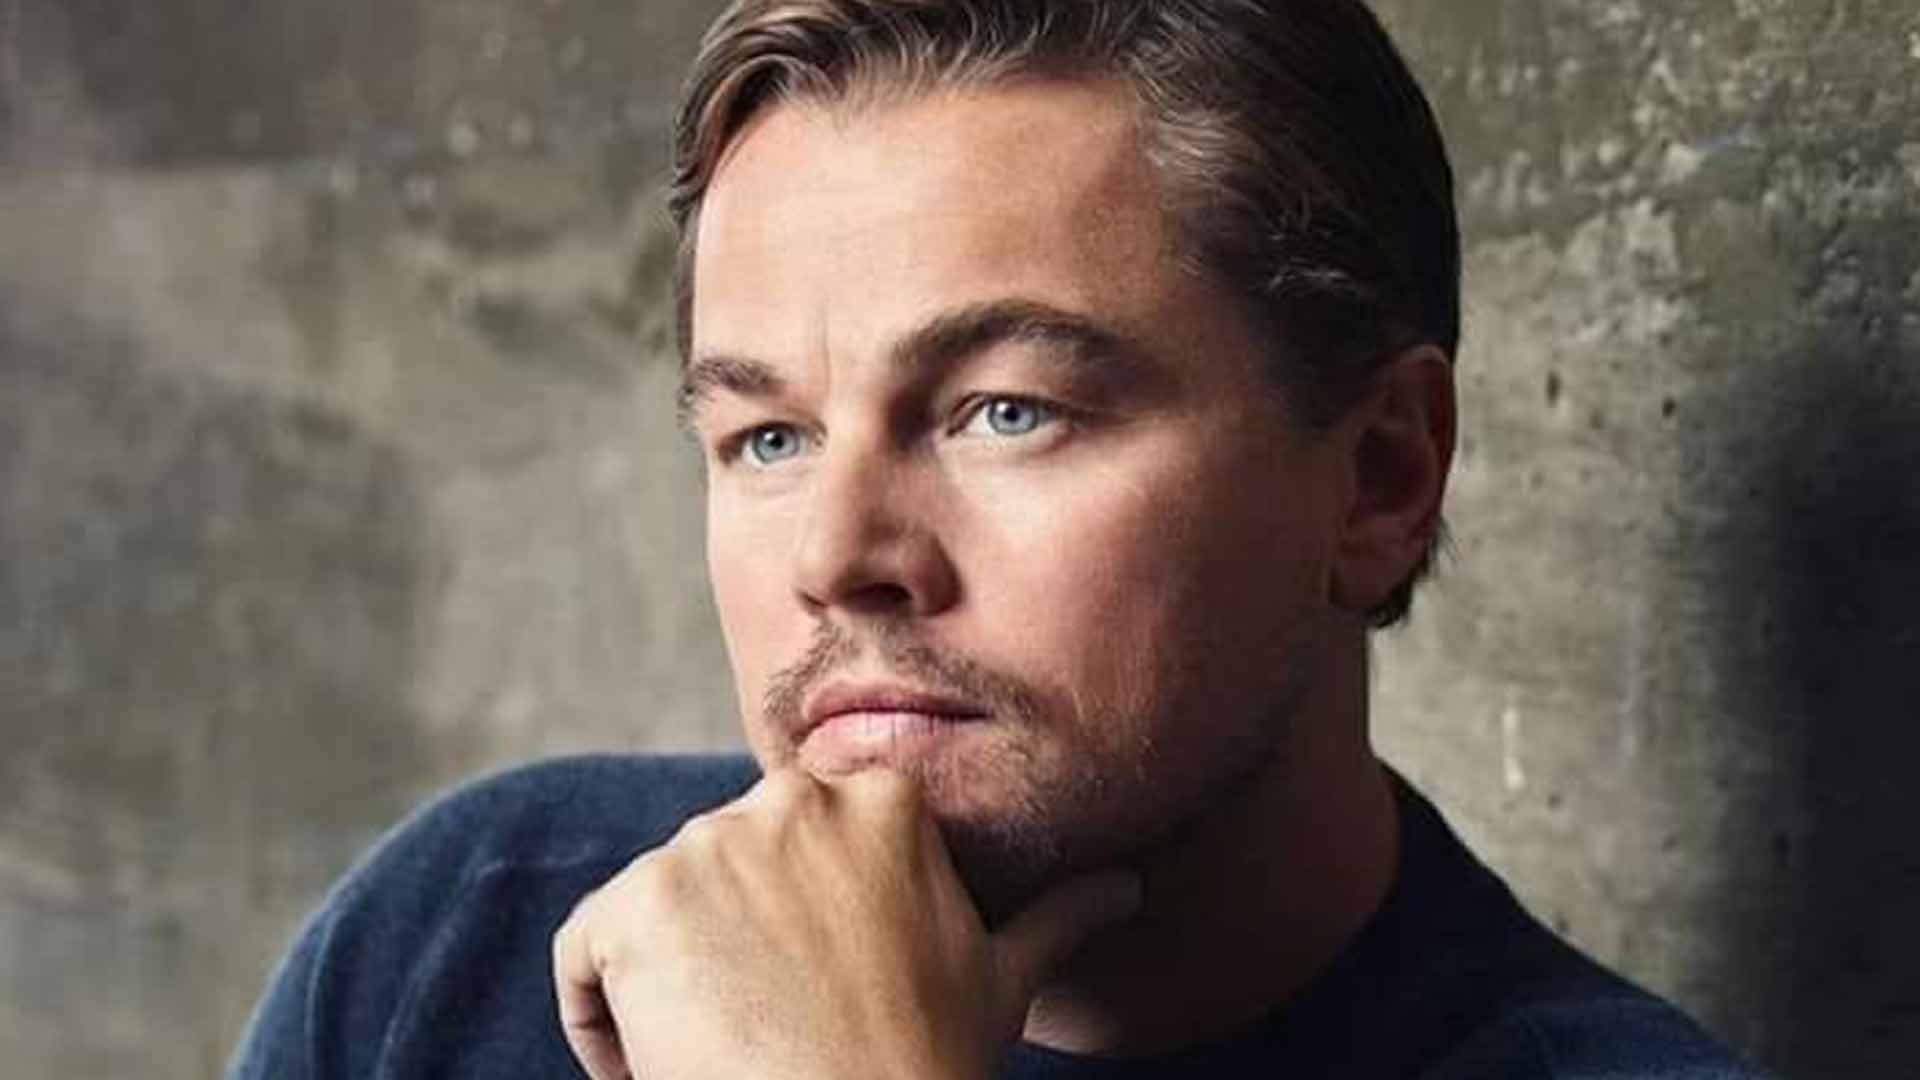 DiCaprio in movie about climate